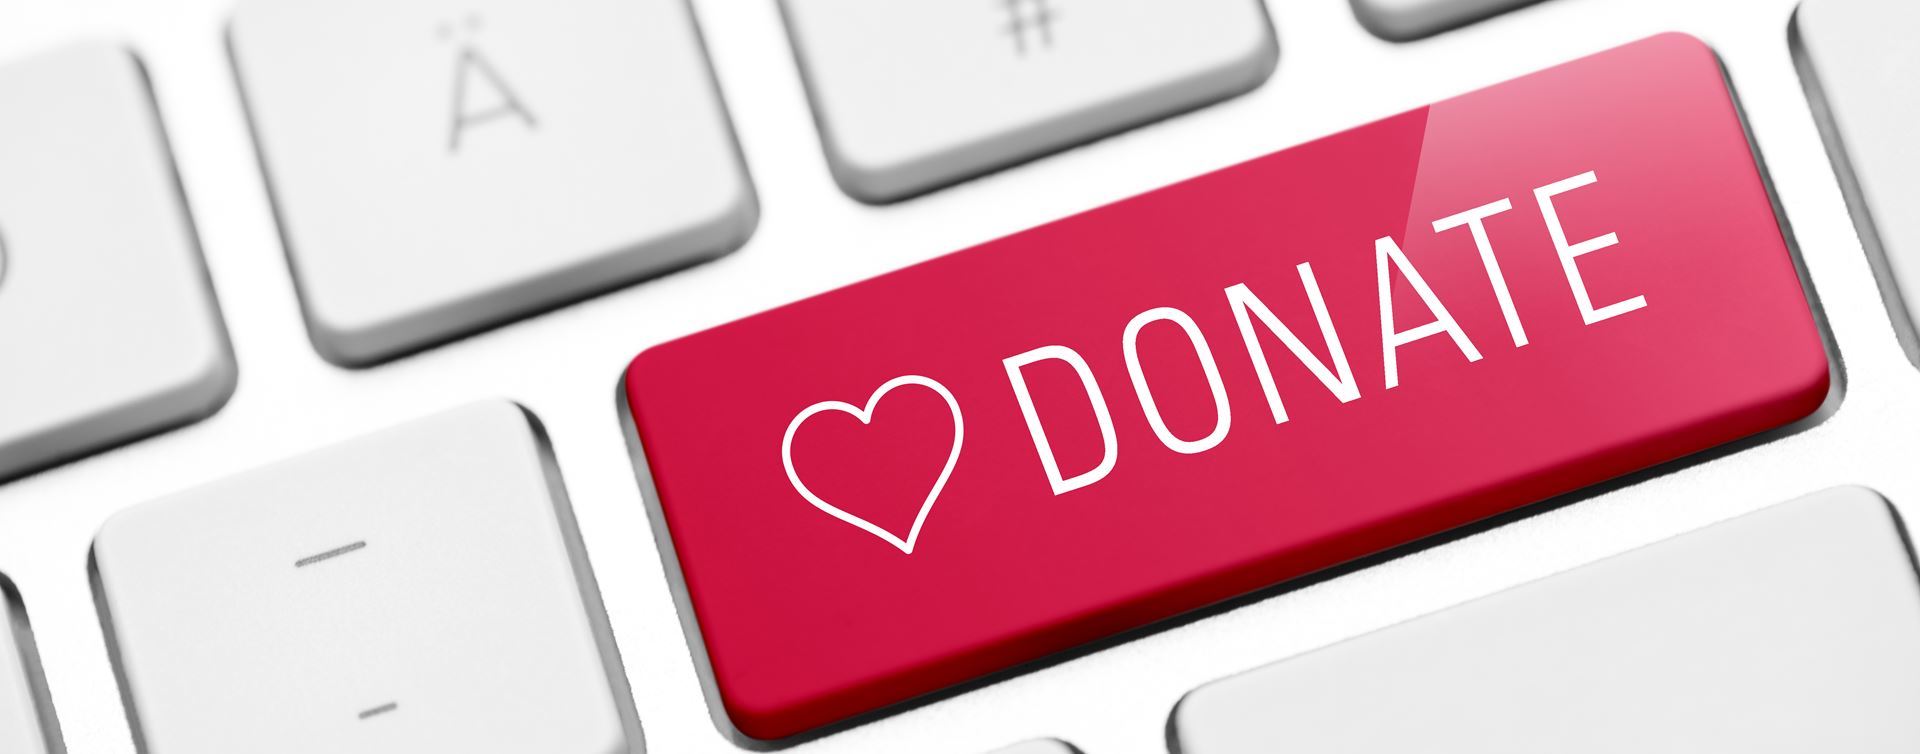 Charitable Donations: Tax deduction tips for charitable 